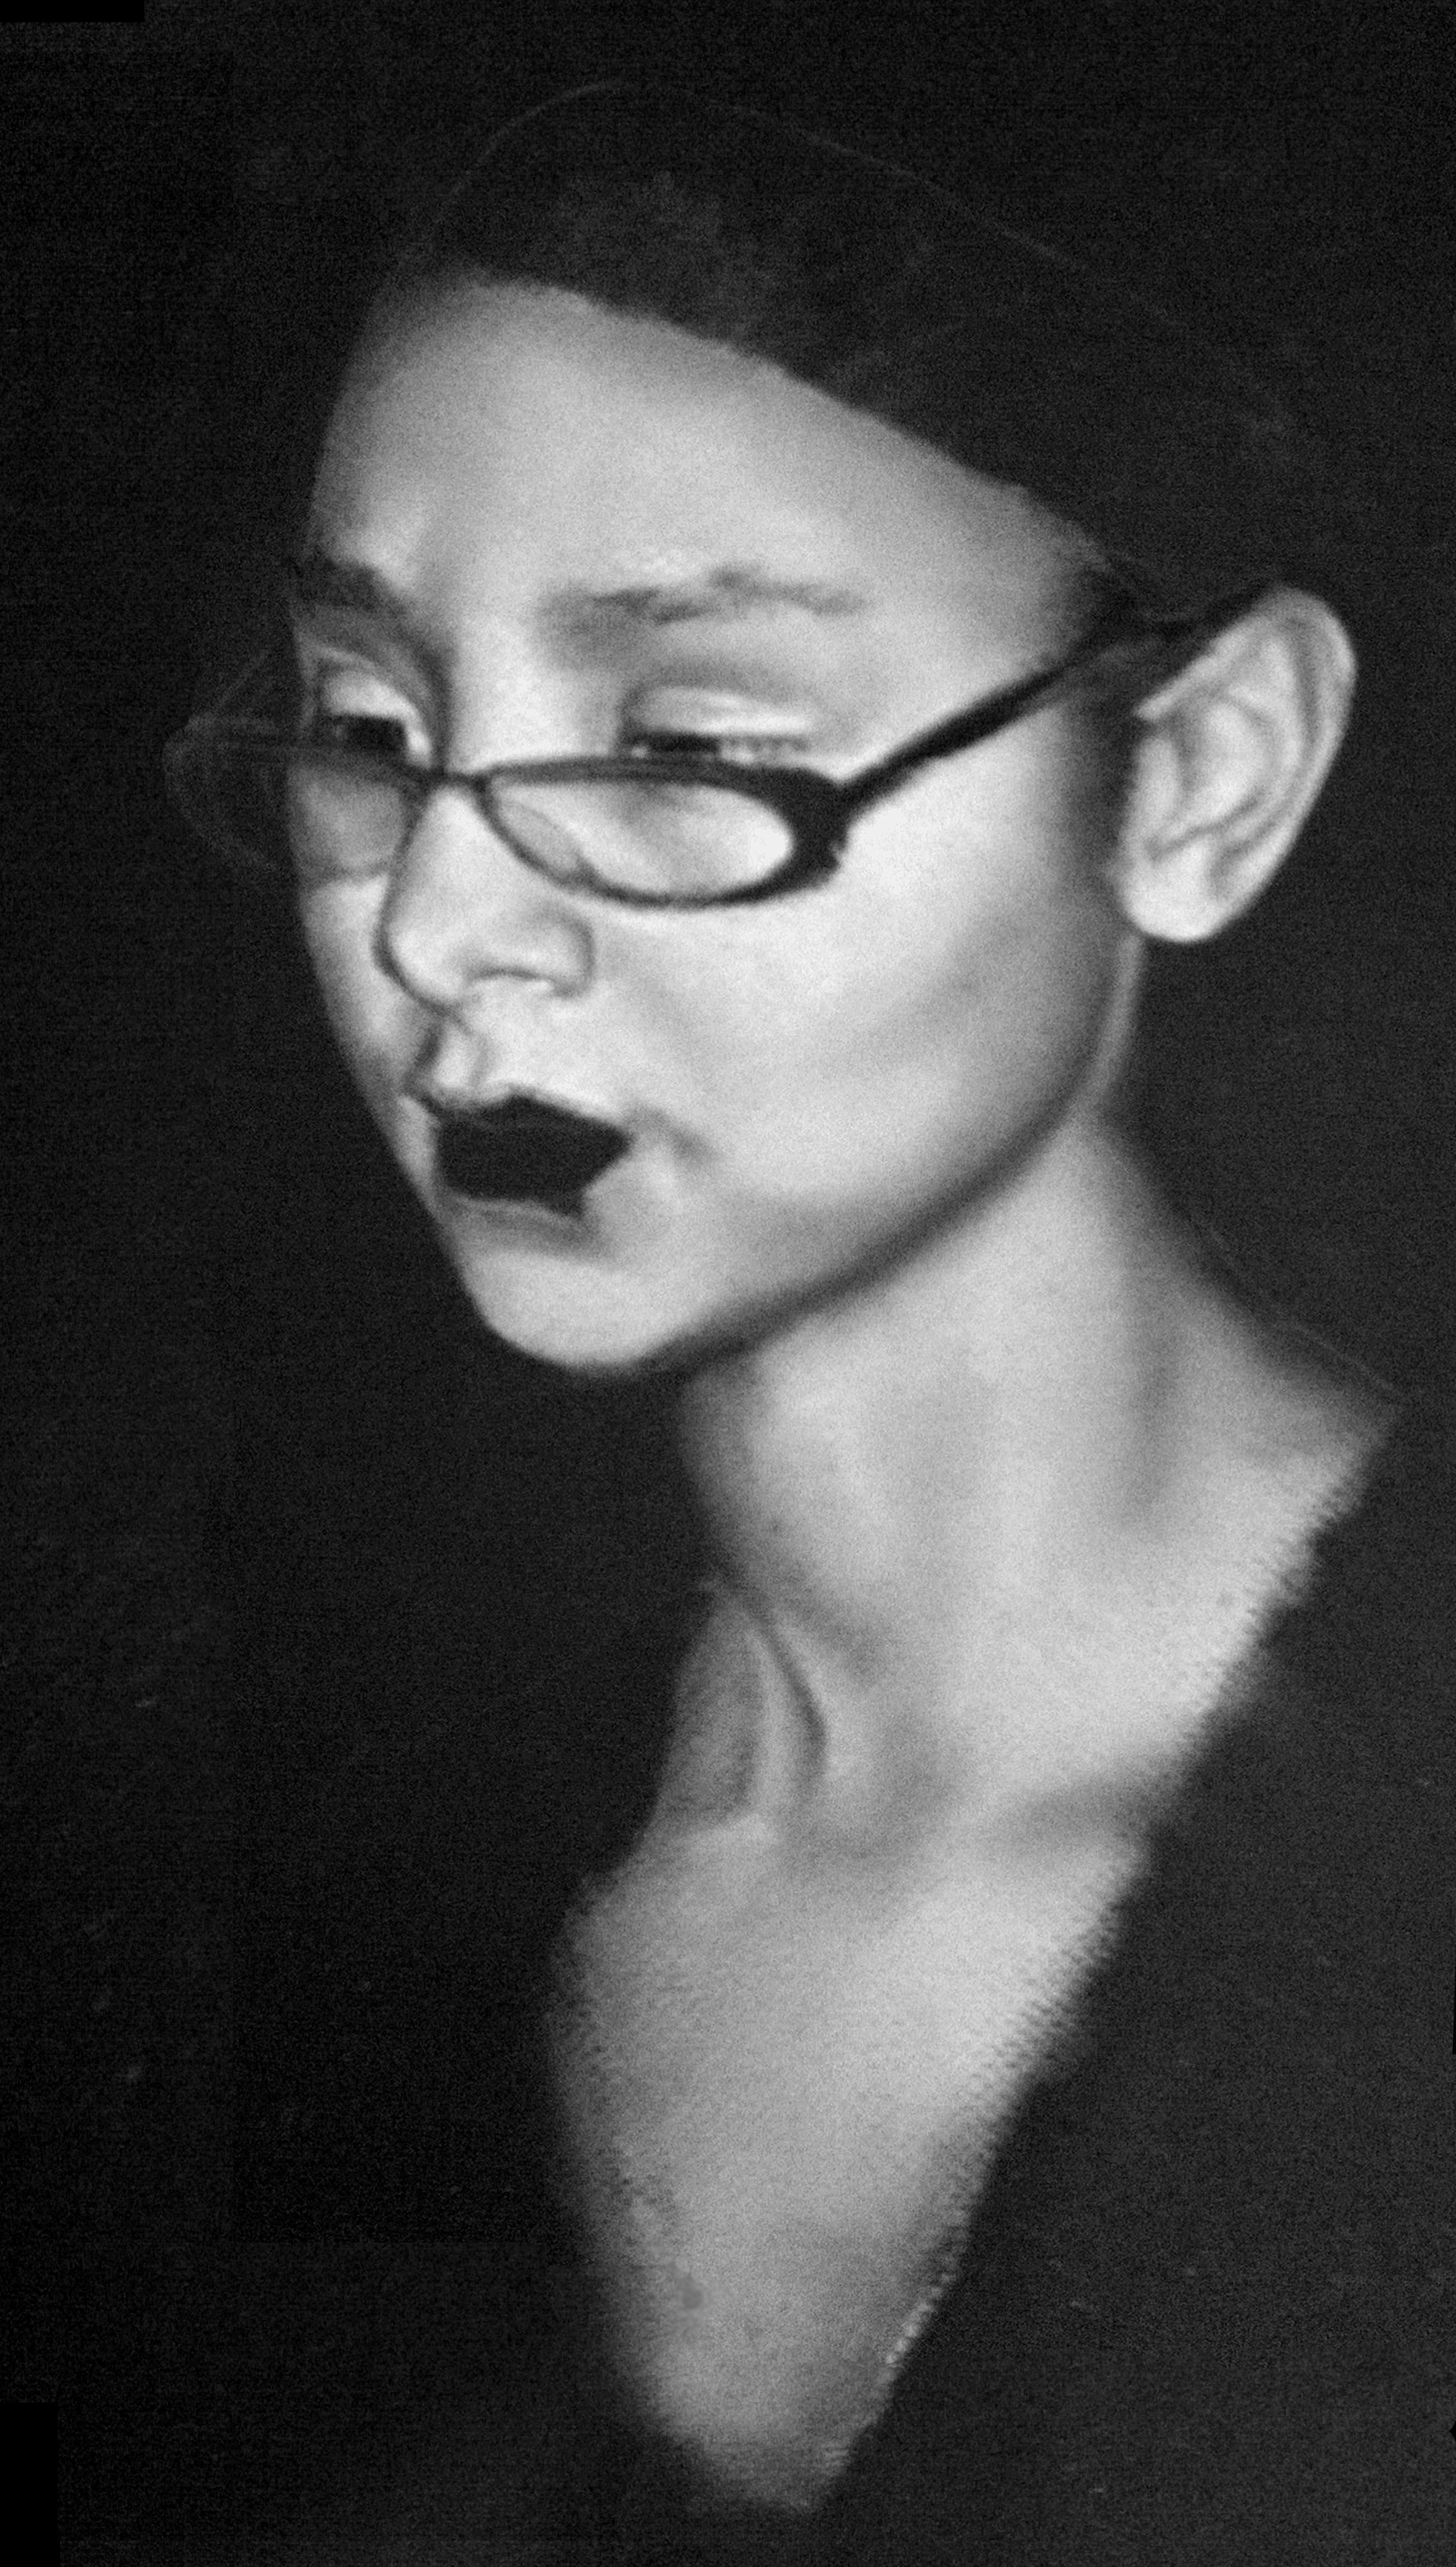  Pastel on paper. 11 x 18 in.  